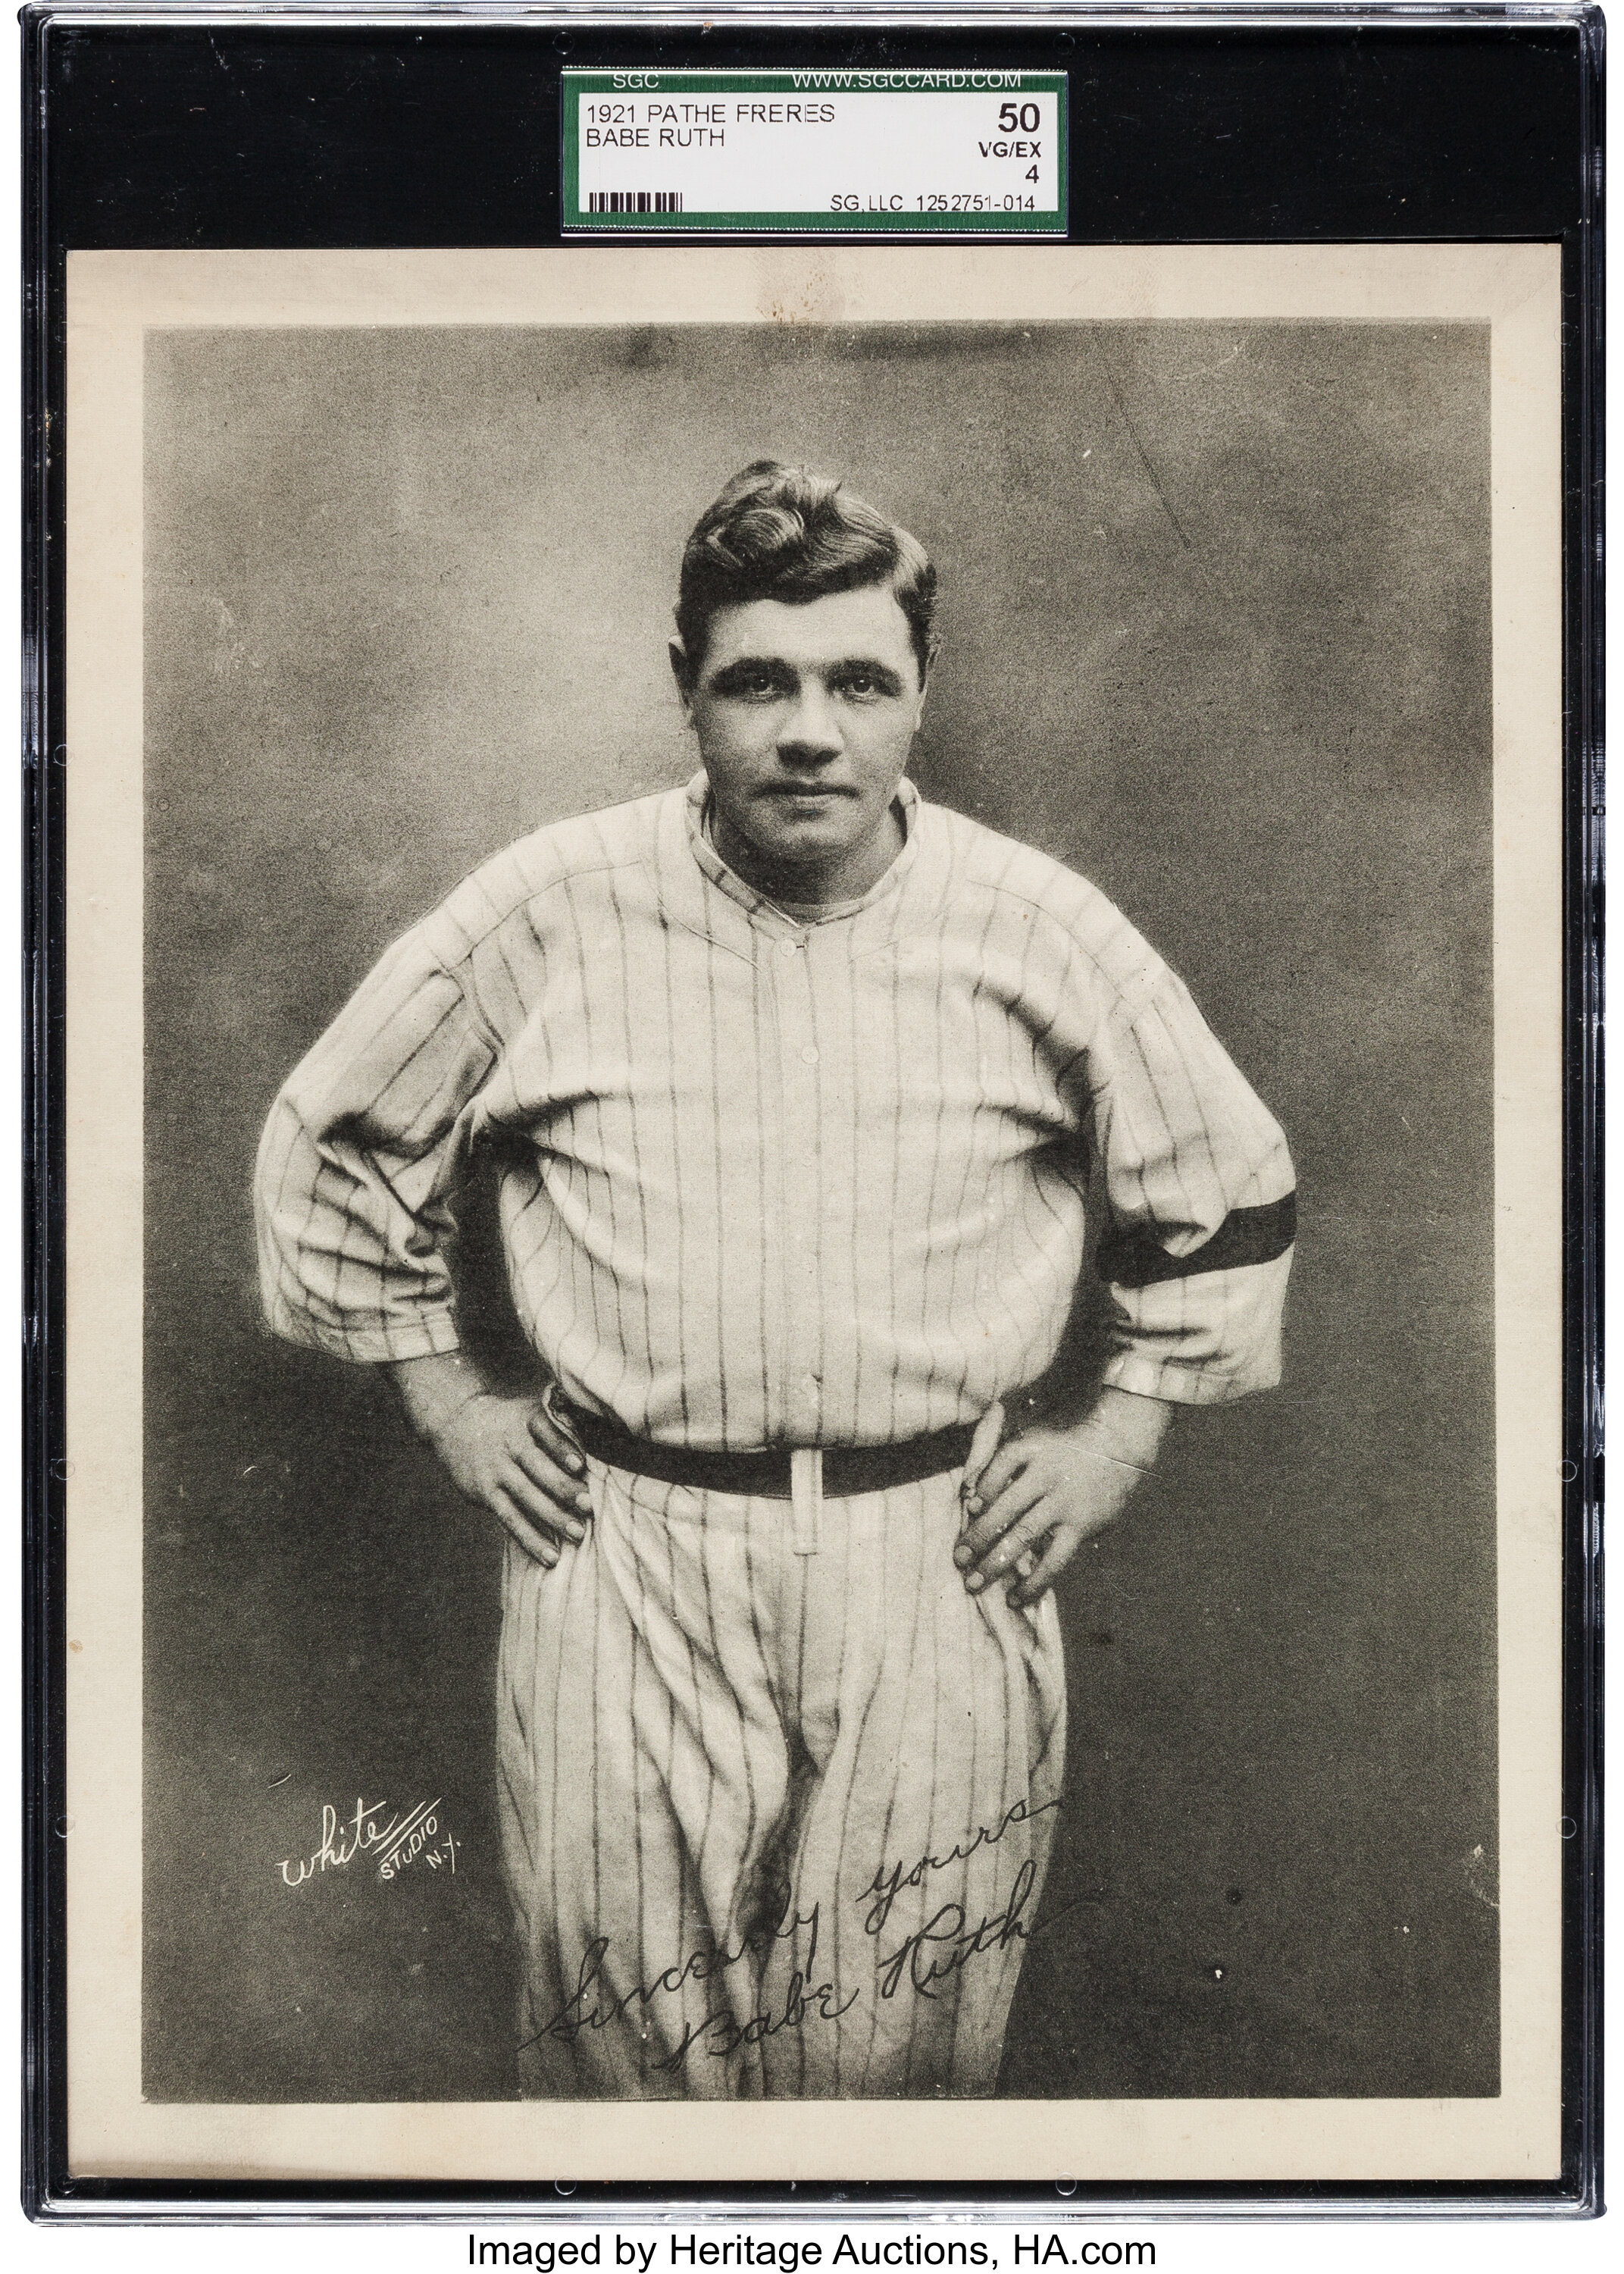 Babe Ruth and The Post  The Saturday Evening Post